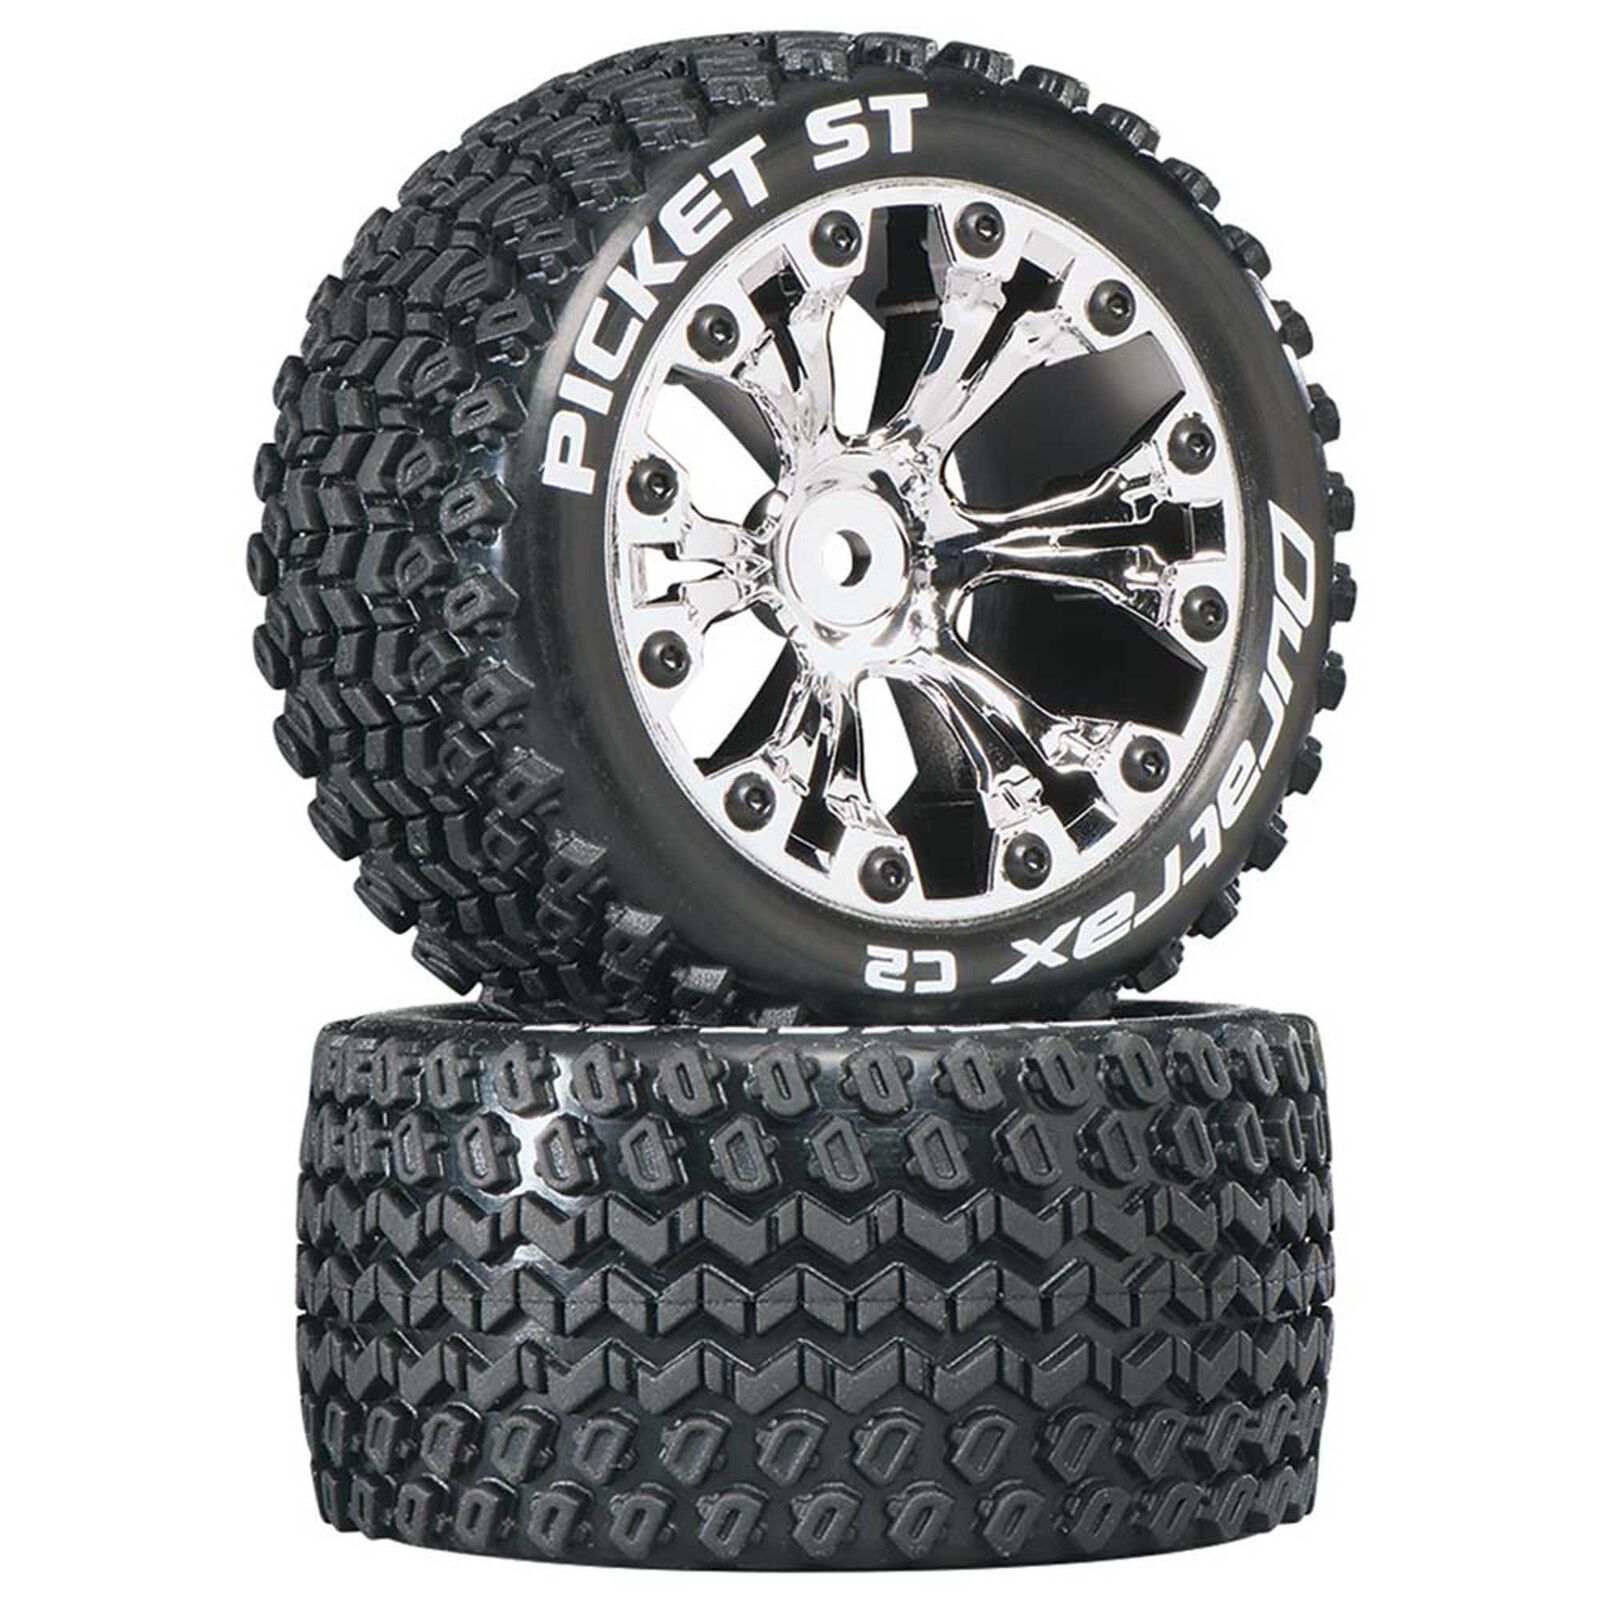 Picket ST 2.8" 2WD Mounted 1/2" Offset Tires, Chrome (2)